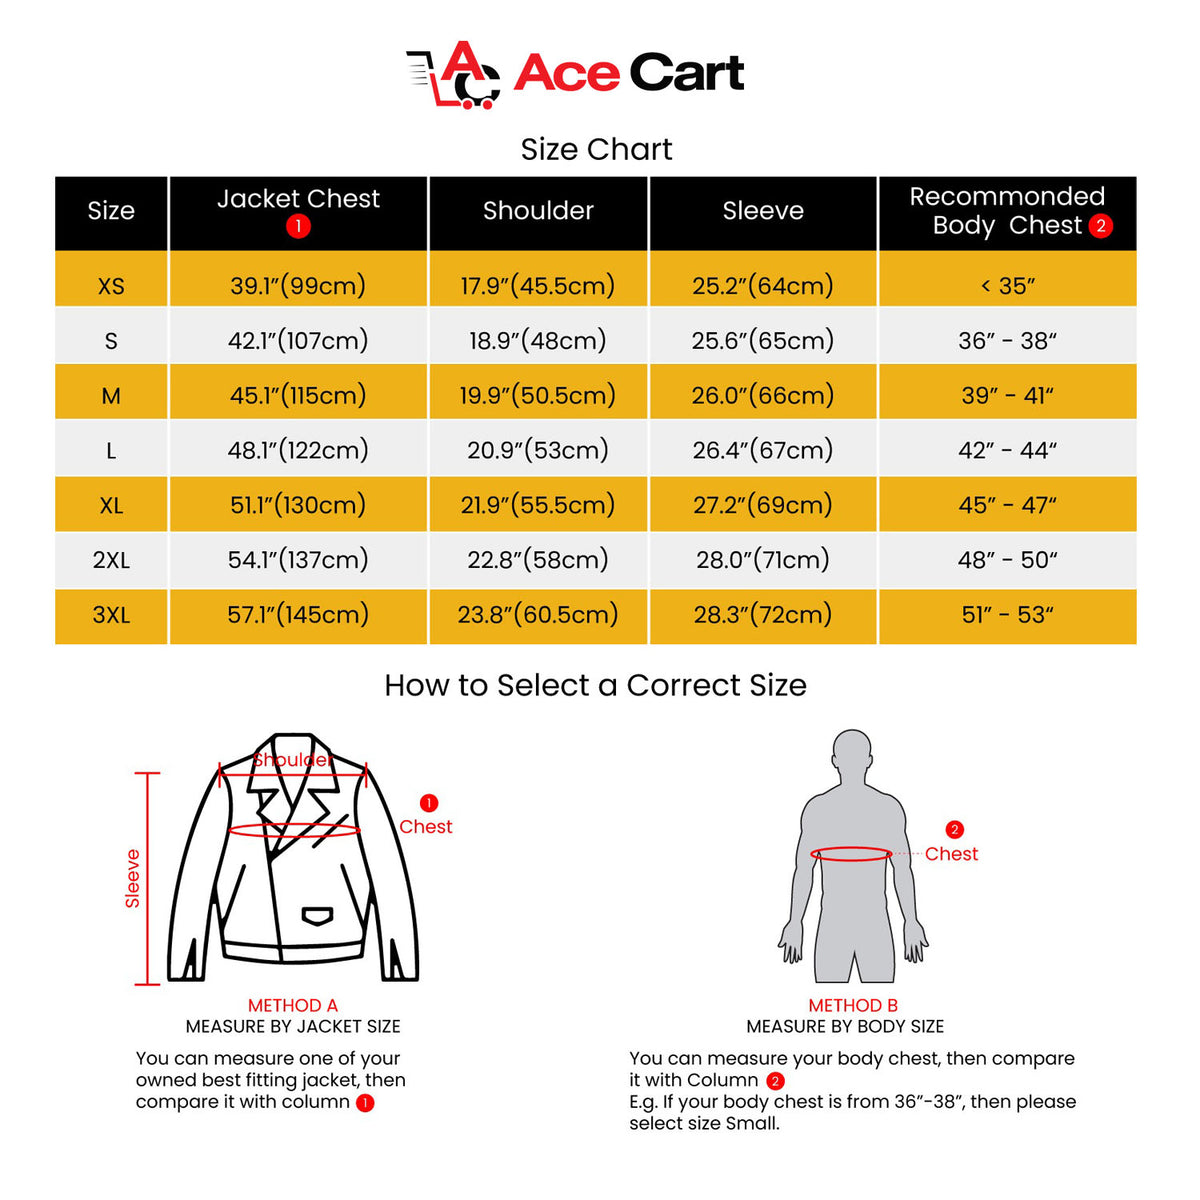 Charcoal mocha suede biker jacket displayed with size chart for Ace Cart brand.